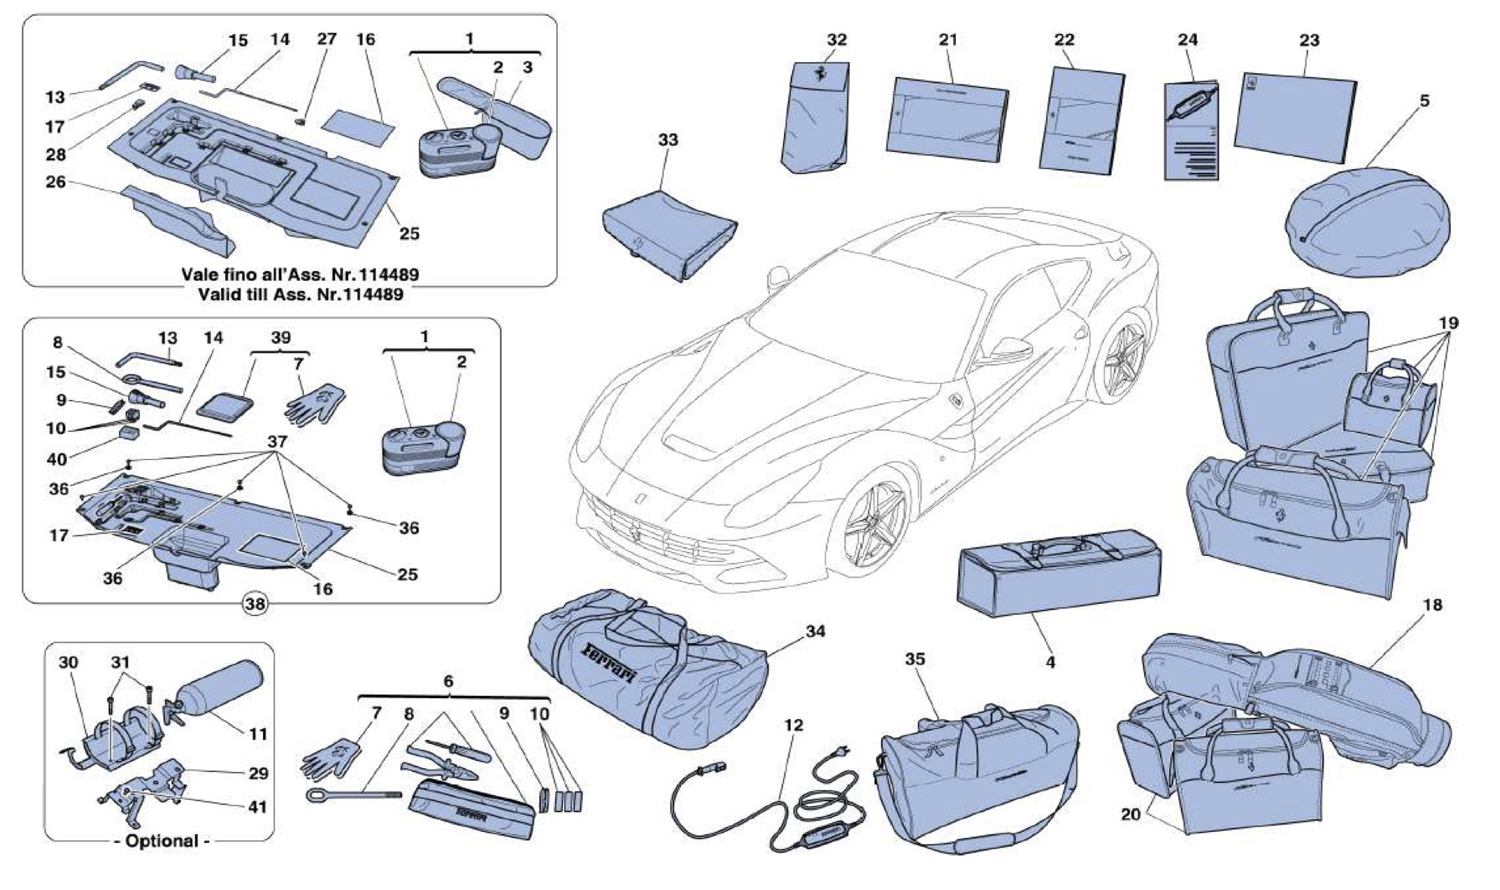 Schematic: Tools And Accessories Provided With Vehicle